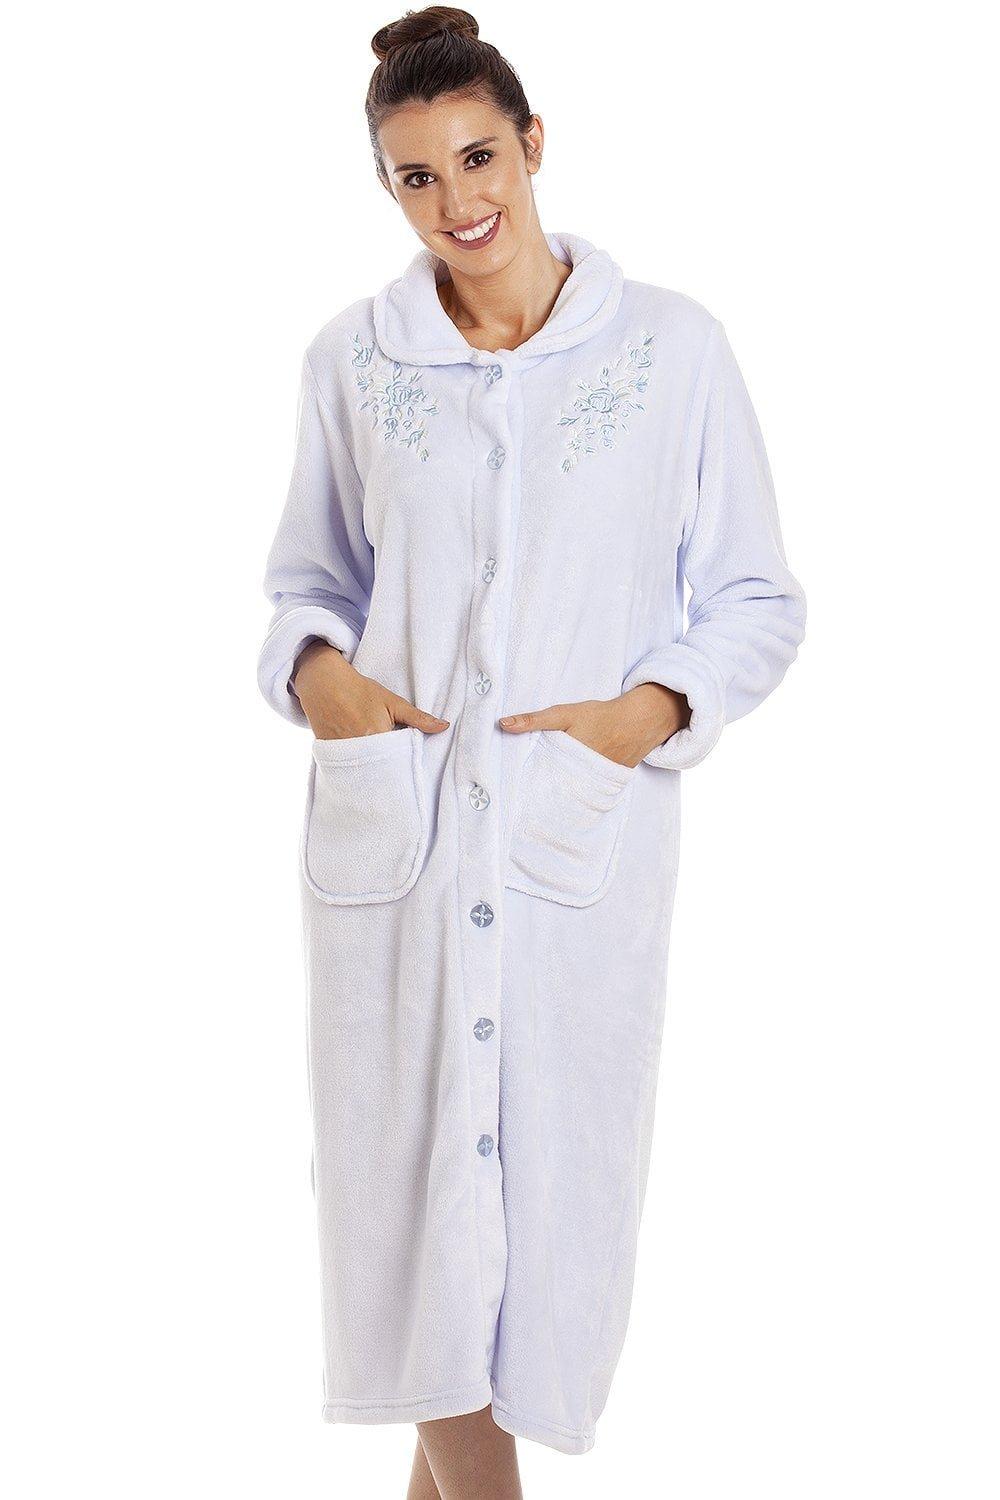 Classic Supersoft Fleece Button Up Housecoat